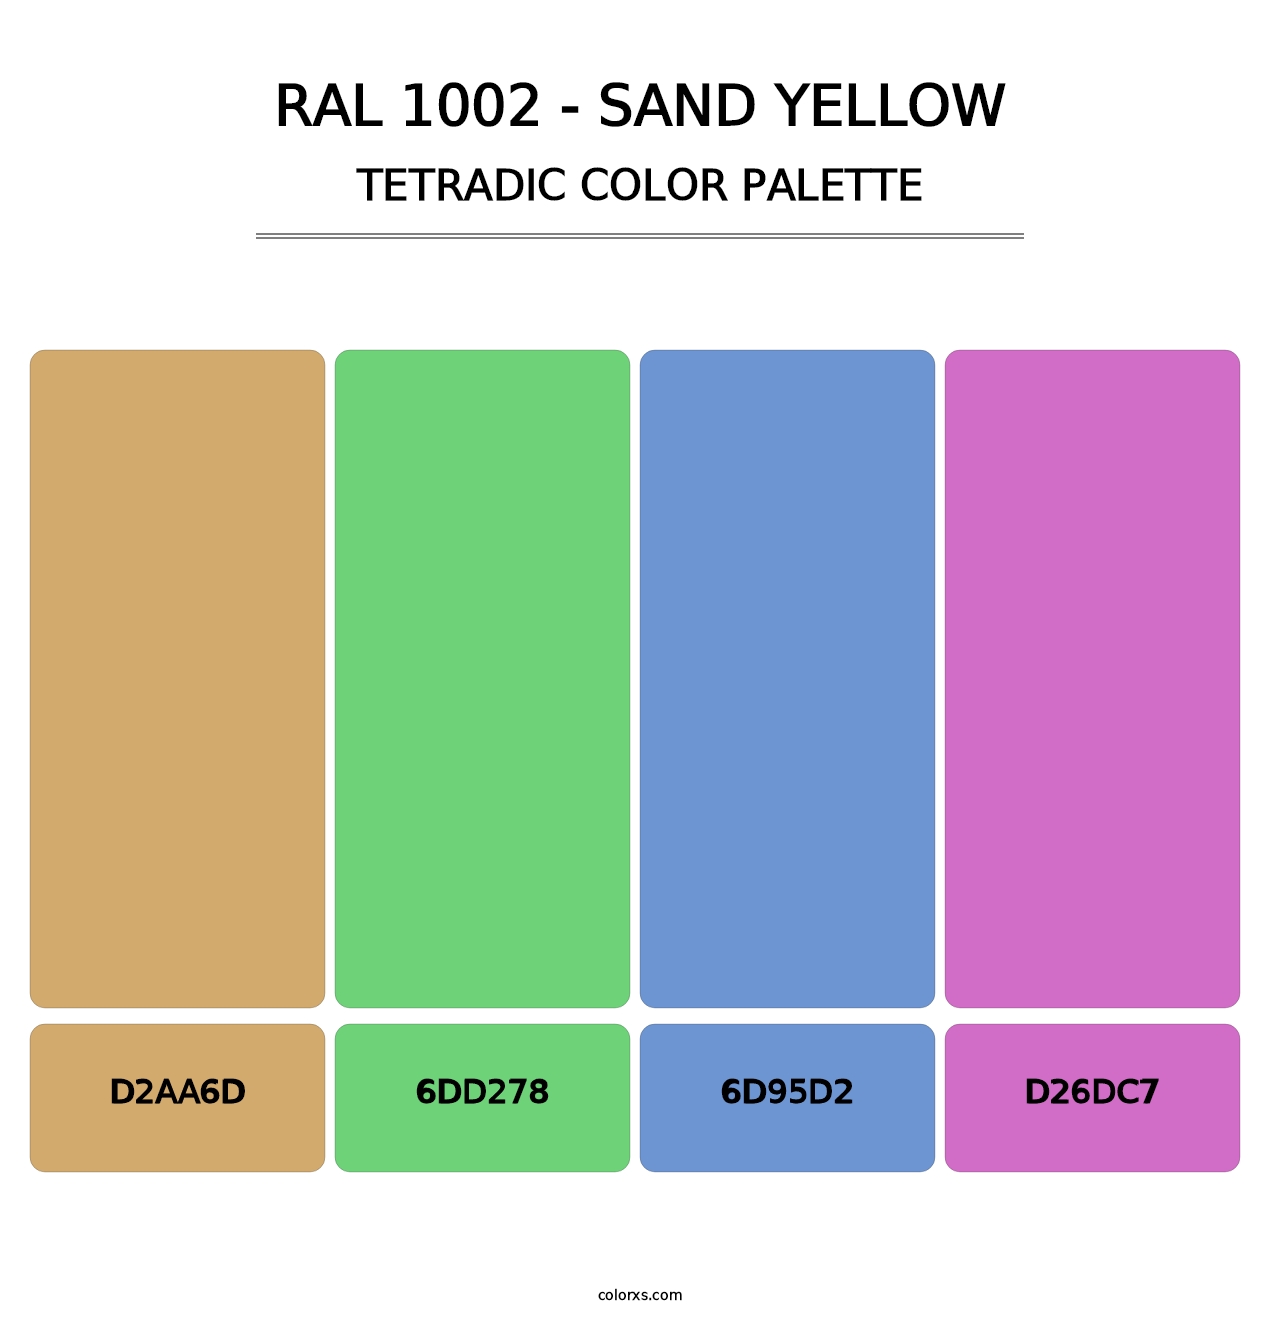 RAL 1002 - Sand Yellow - Tetradic Color Palette